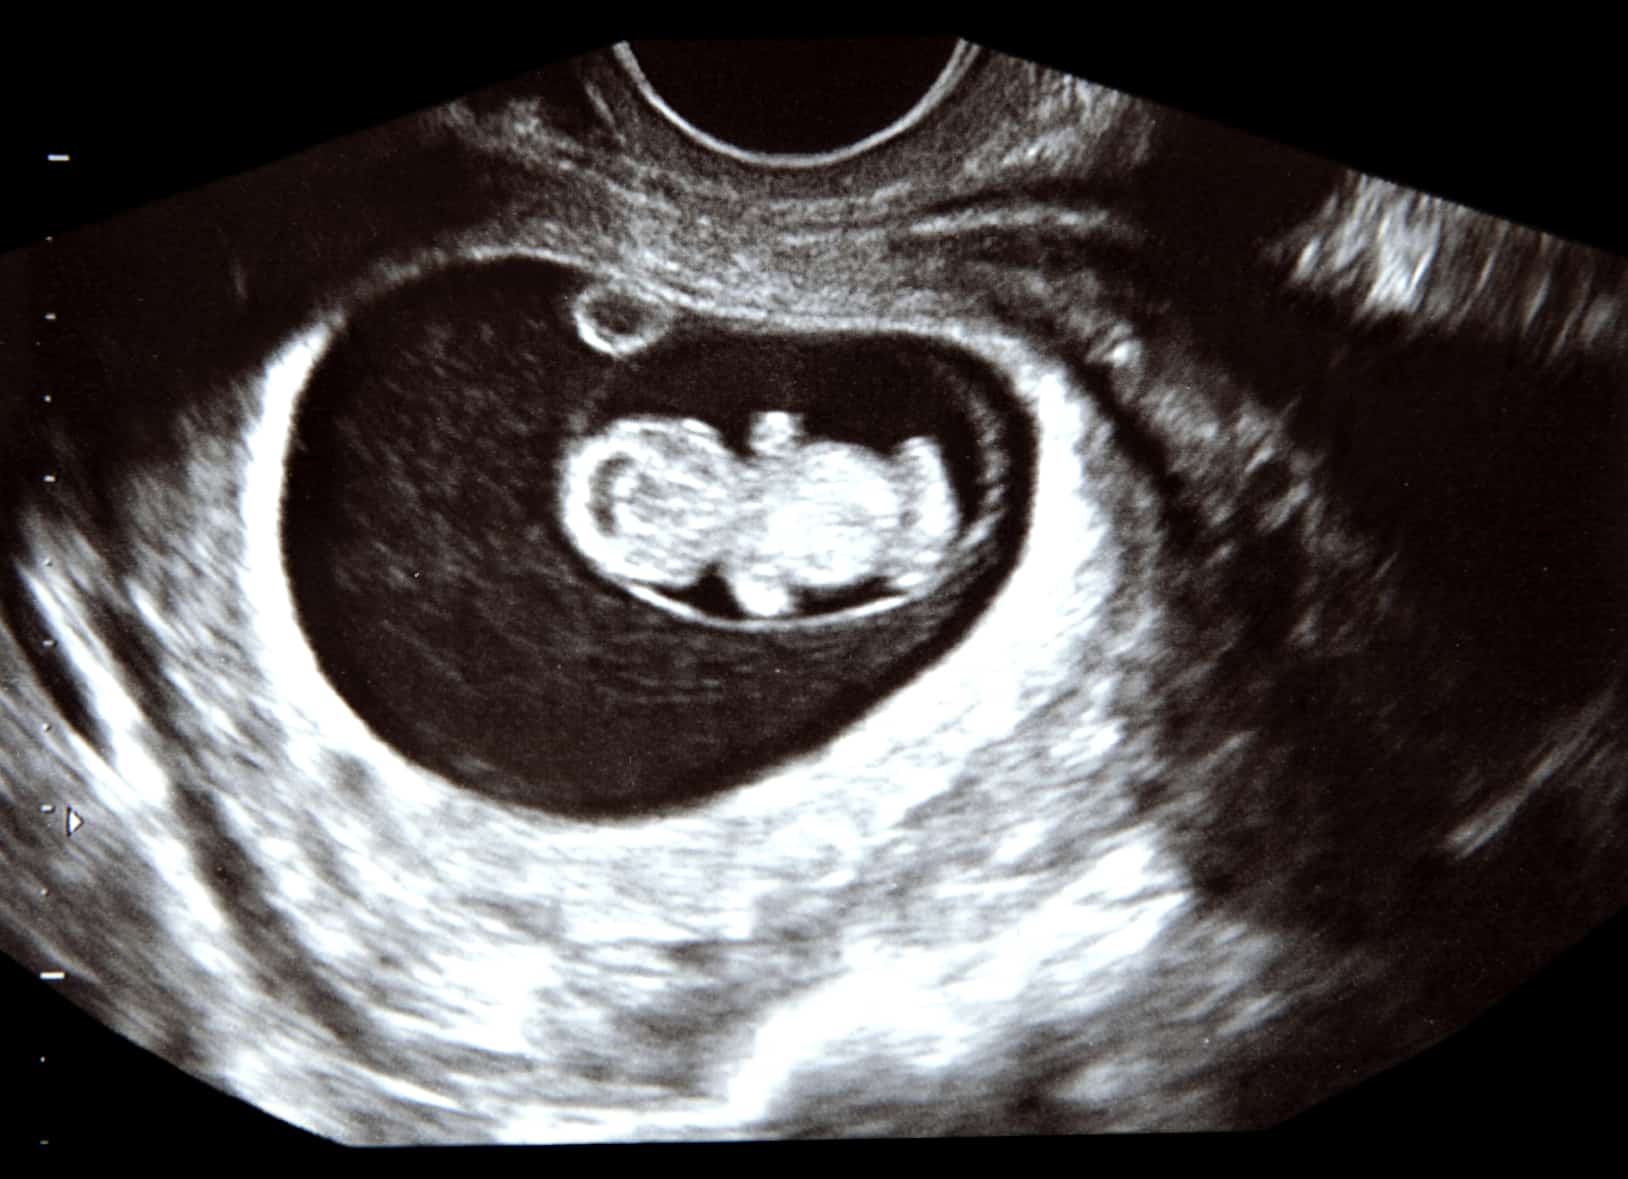 9 Week Ultrasound - New Life Family Services